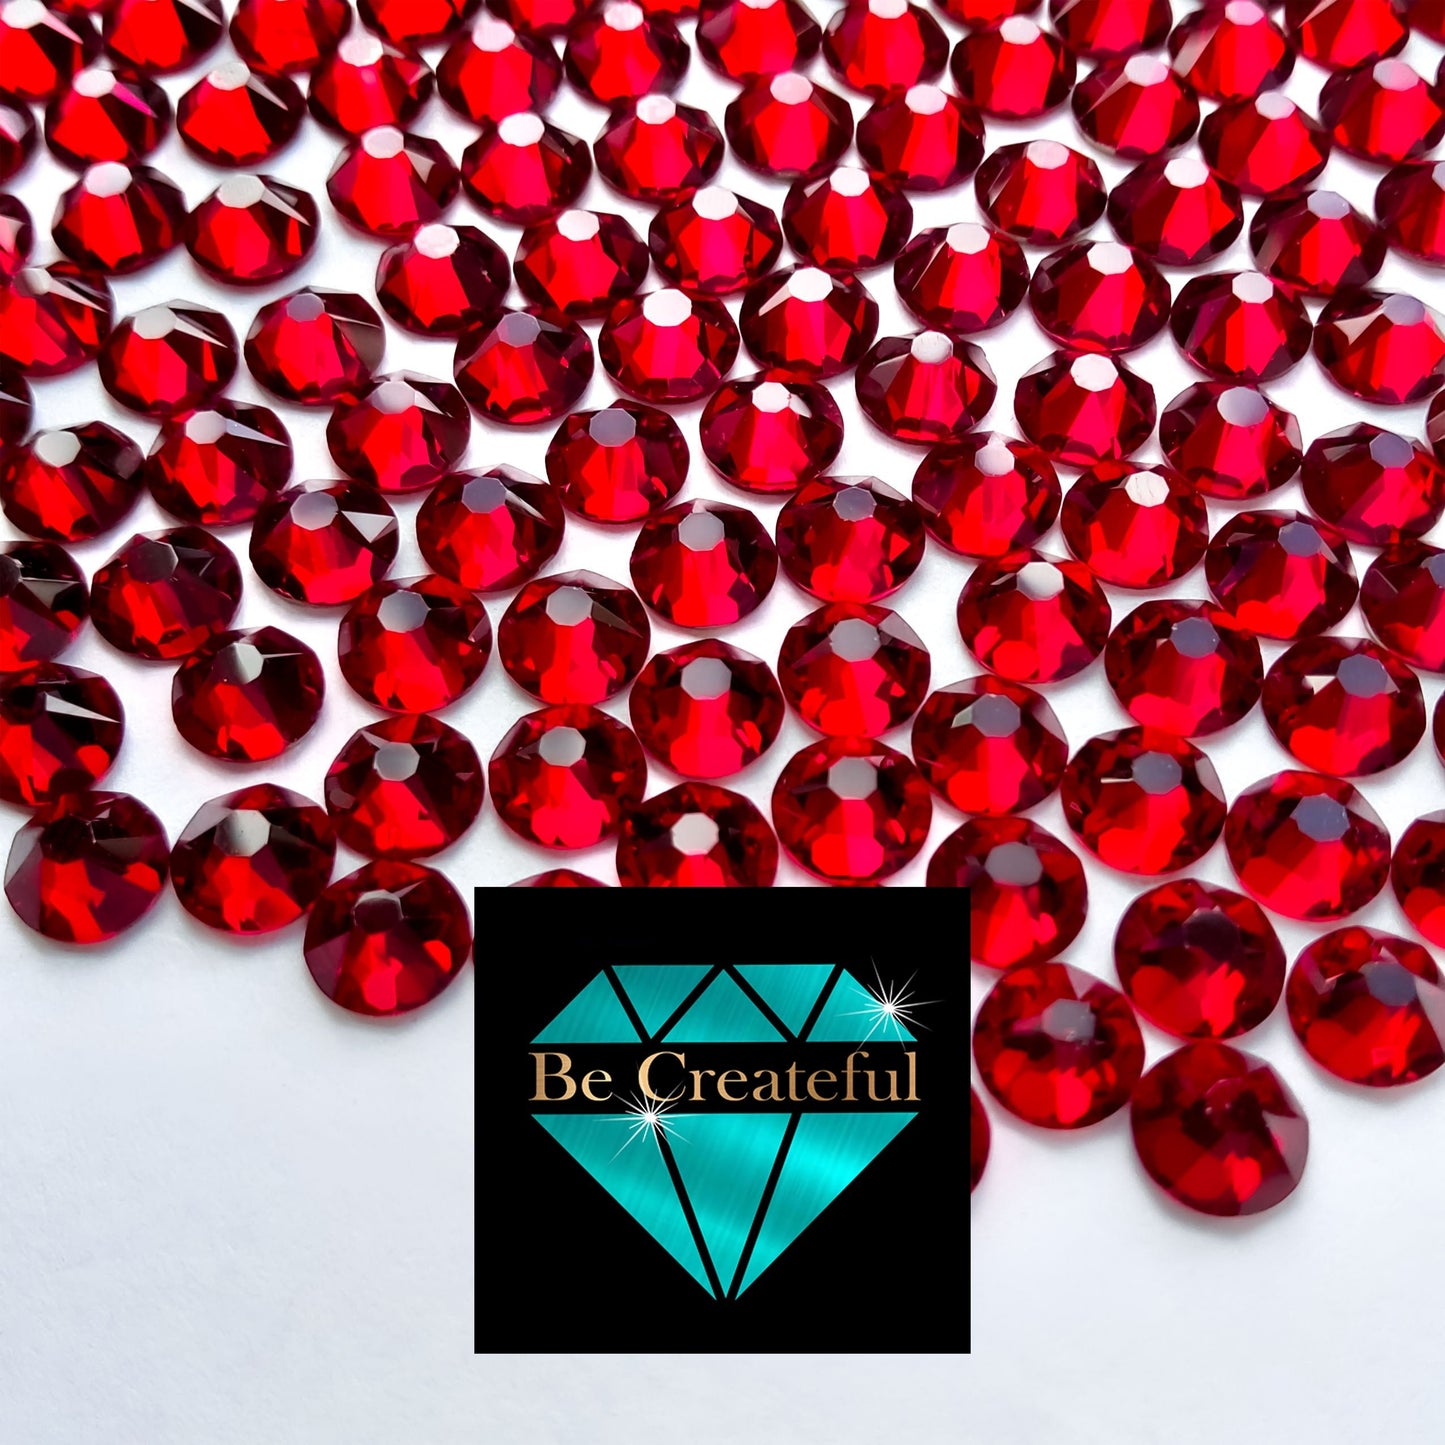 LUXE® Dark Siam Red Hotfix Rhinestones are high-quality 16 facet glass Rhinestone with intense sparkle and refraction.